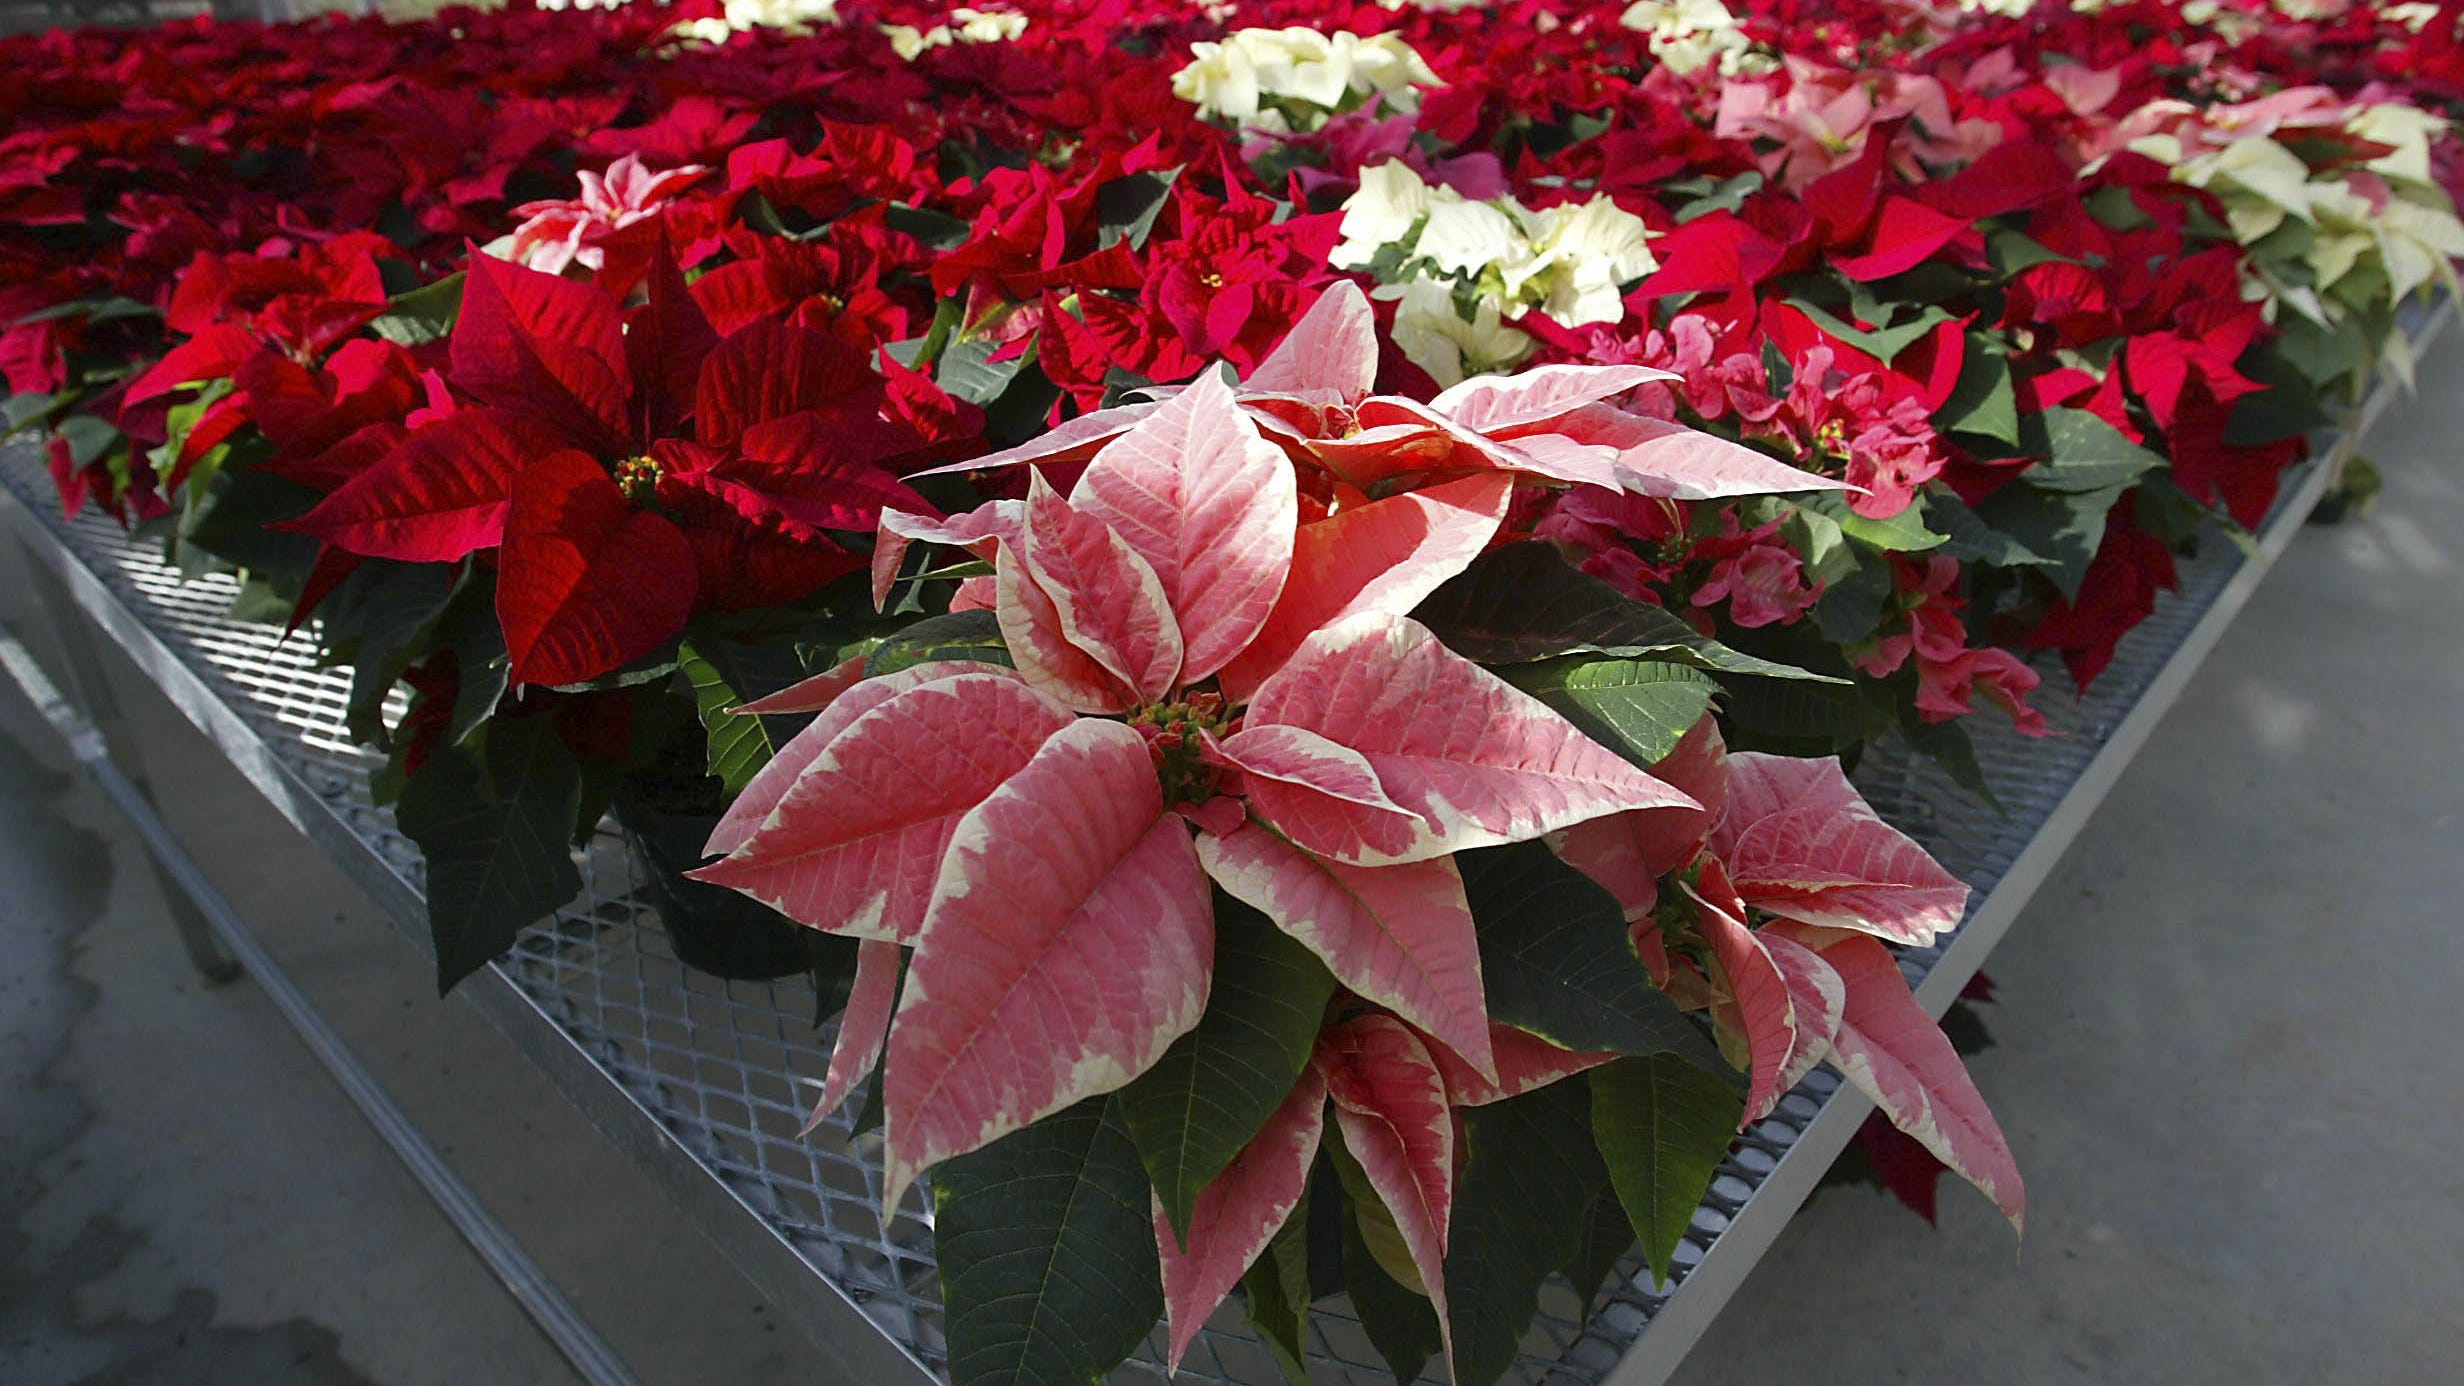 Today is National Poinsettia Day